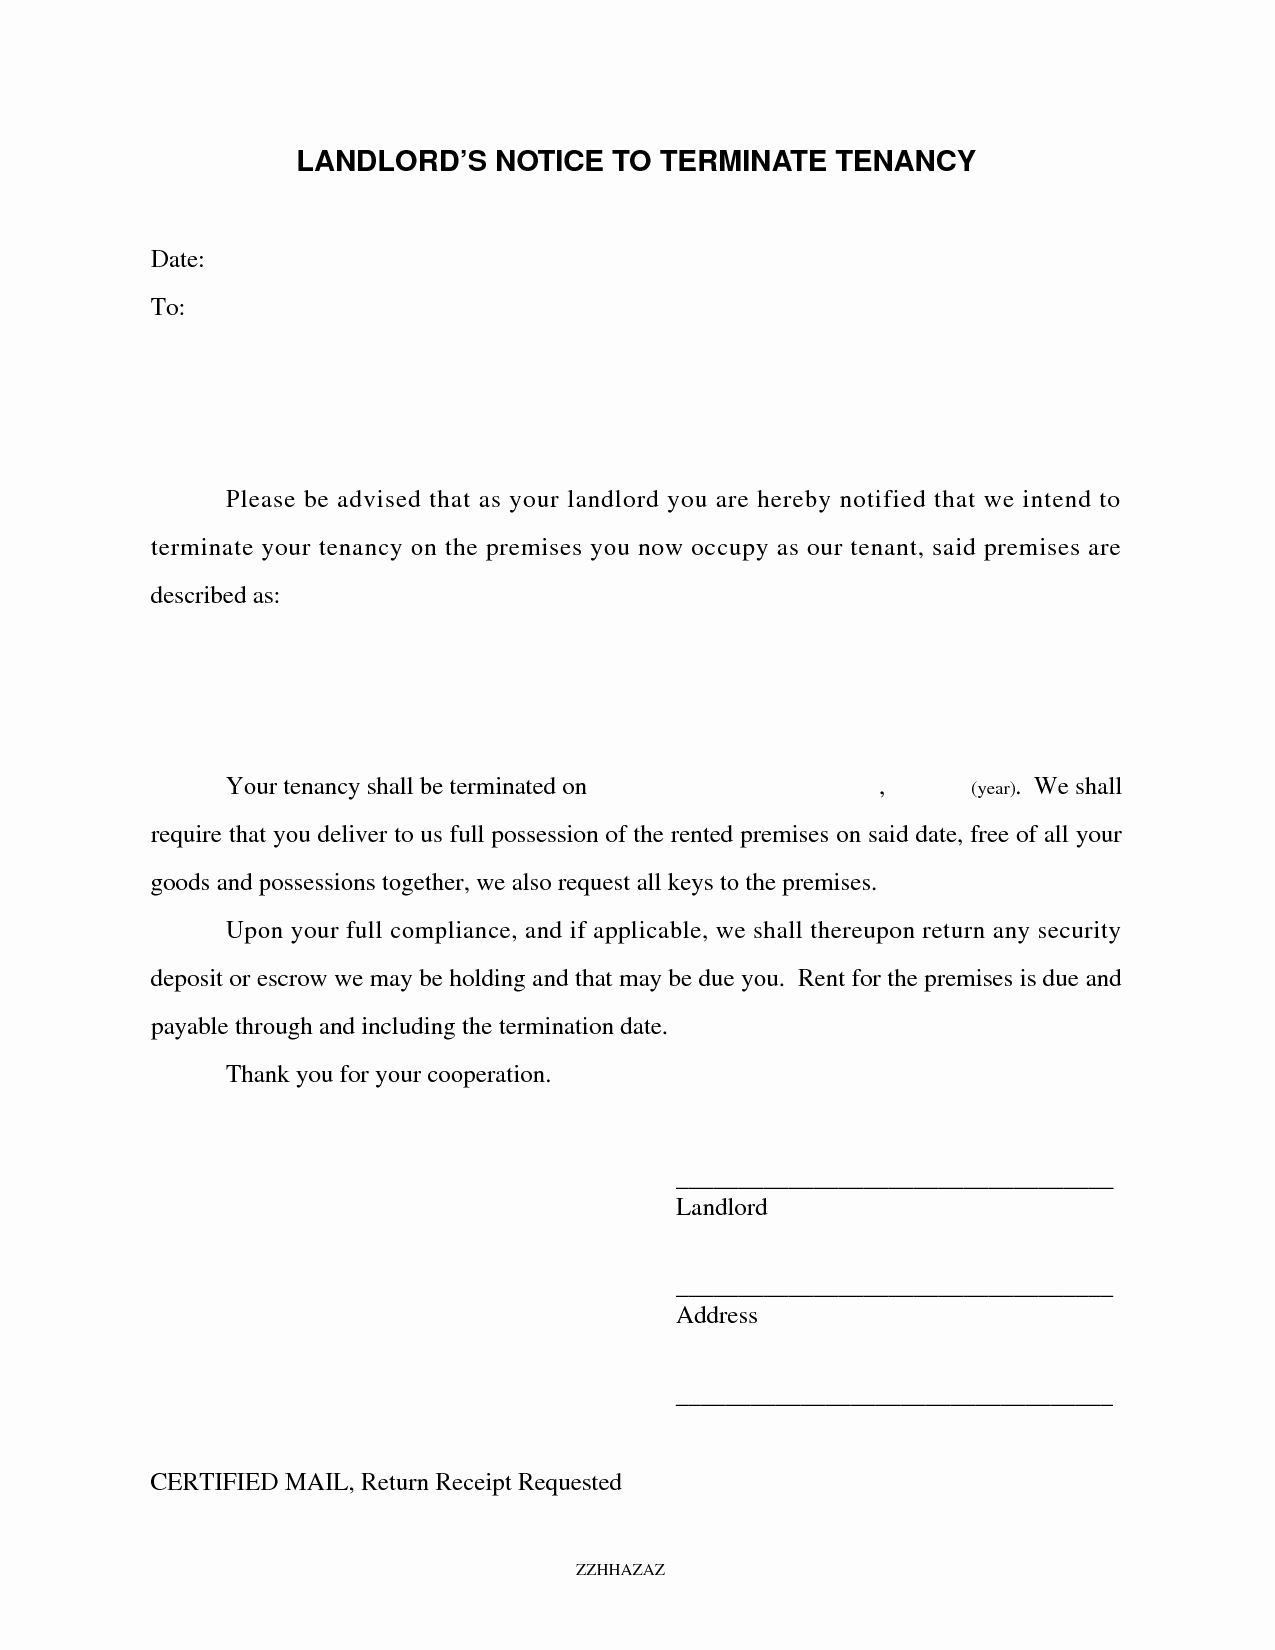 Tenant Letter to Landlord New Tenant Lease Termination Letter From Landlord